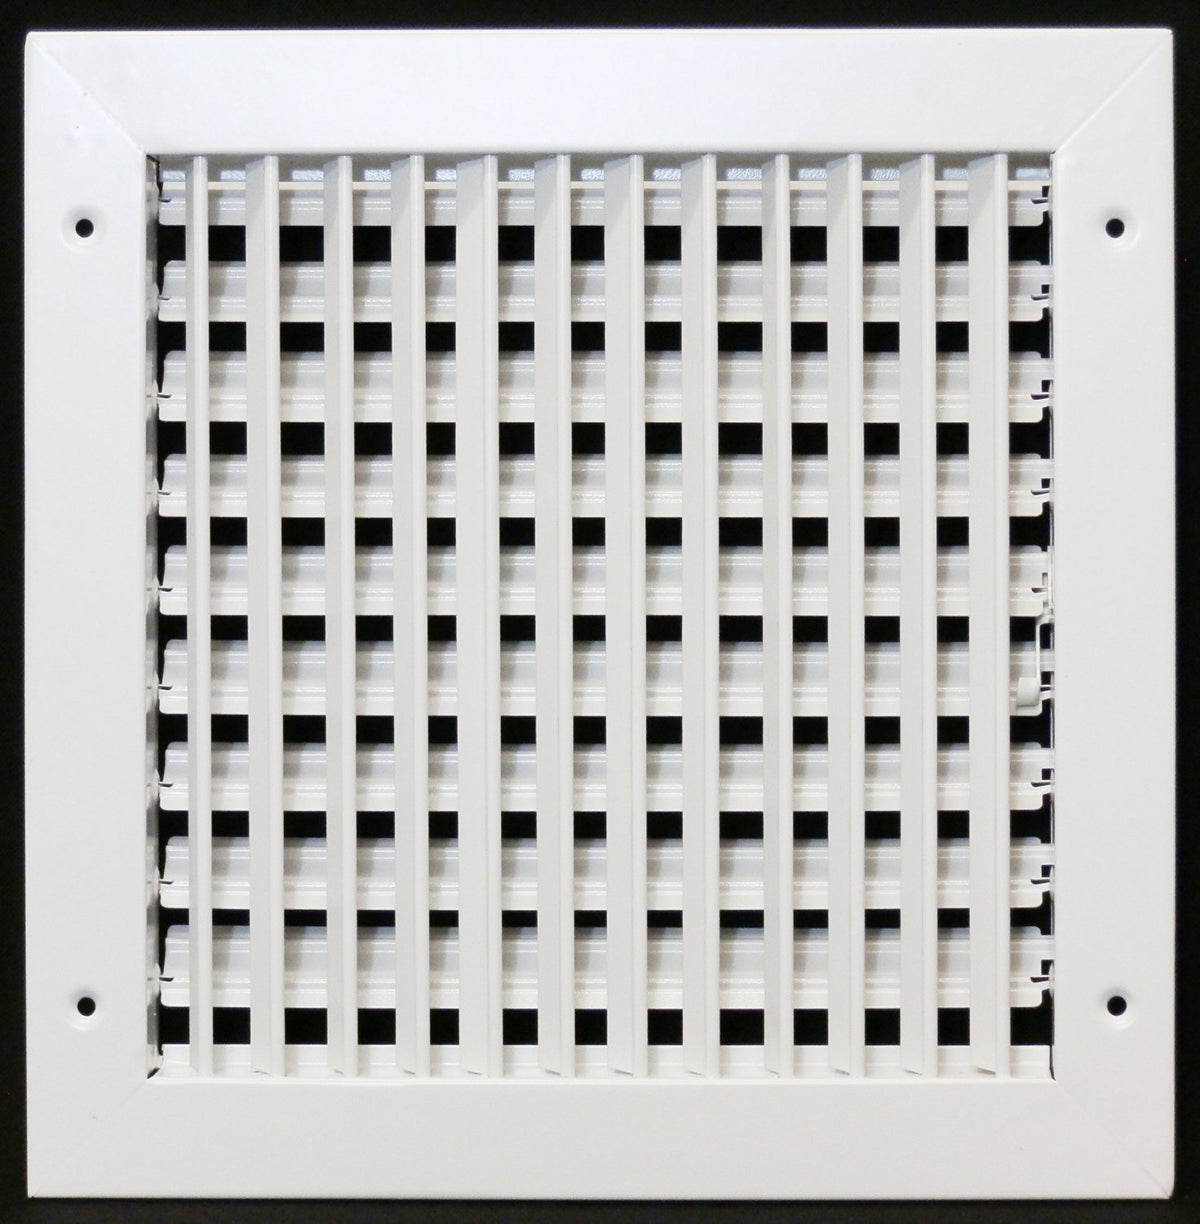 10&quot; X 10&quot; ADJUSTABLE AIR SUPPLY DIFFUSER - HVAC Vent Duct Cover Sidewall or Ceiling